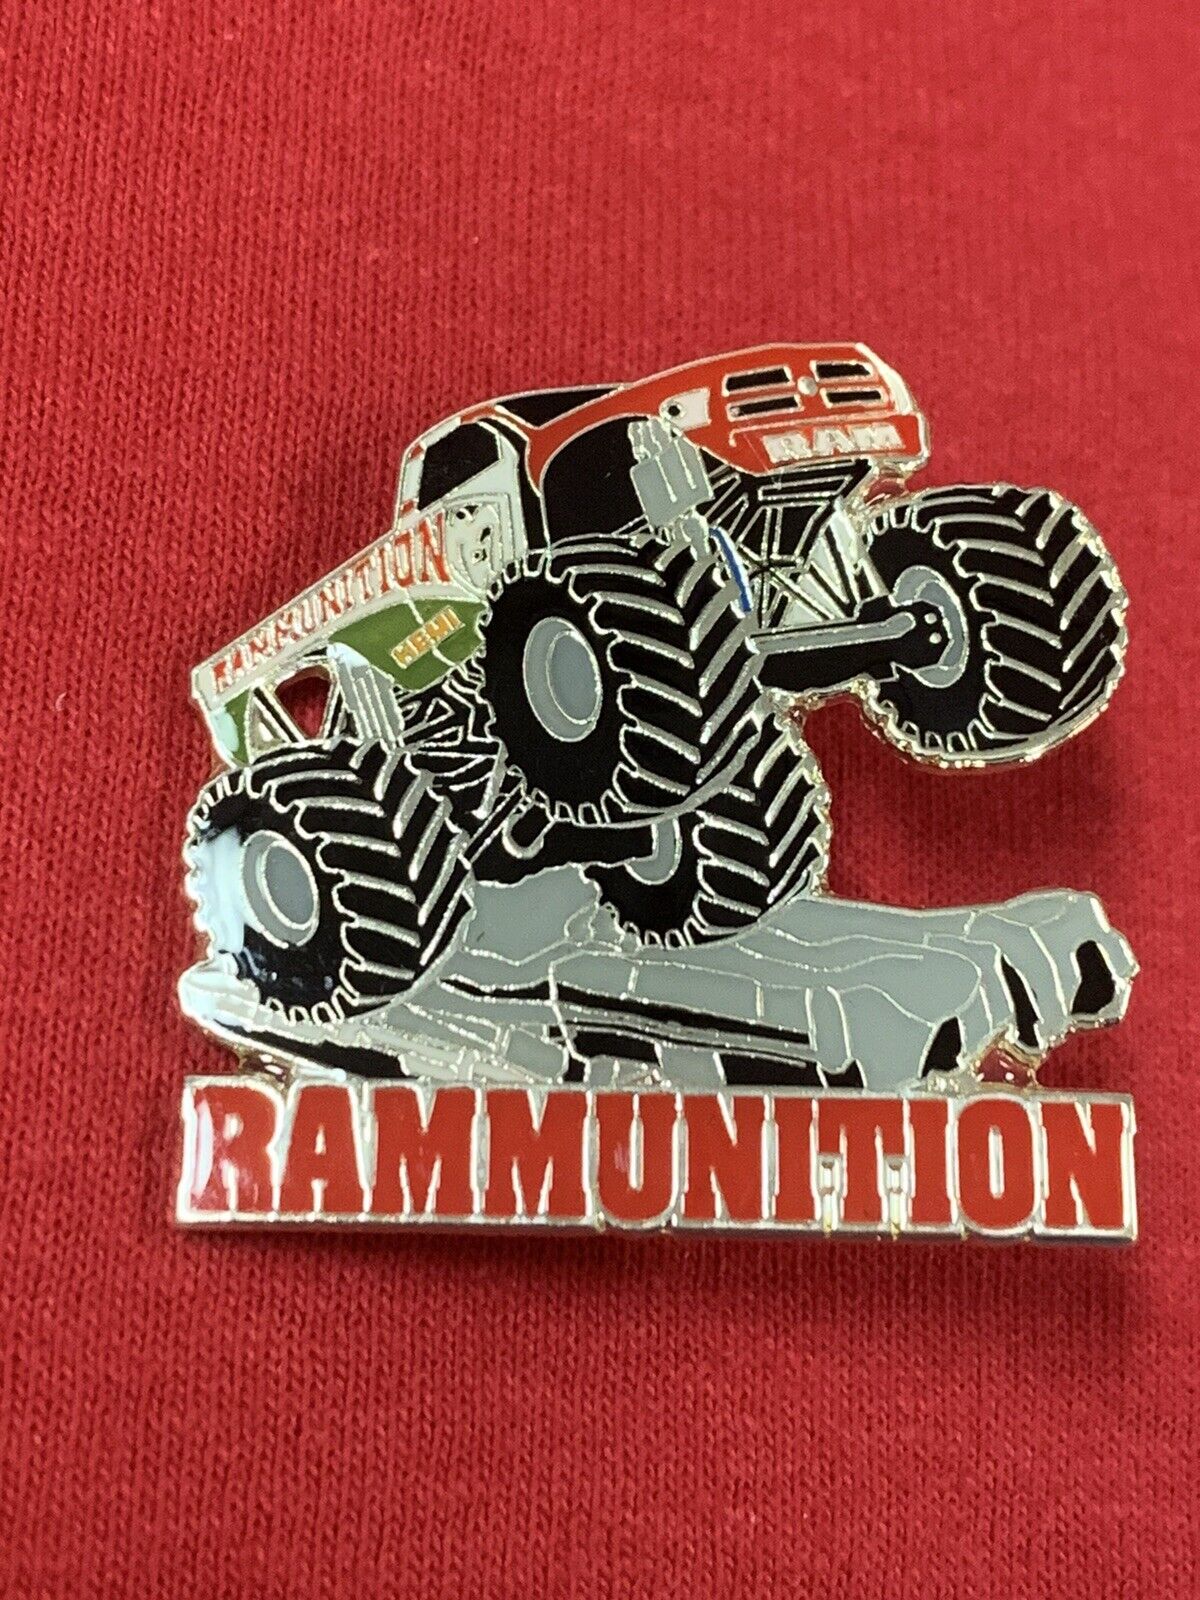 Rammunition Monster Truck collectible lapel pin, tie tack, hatpin museum 4X4